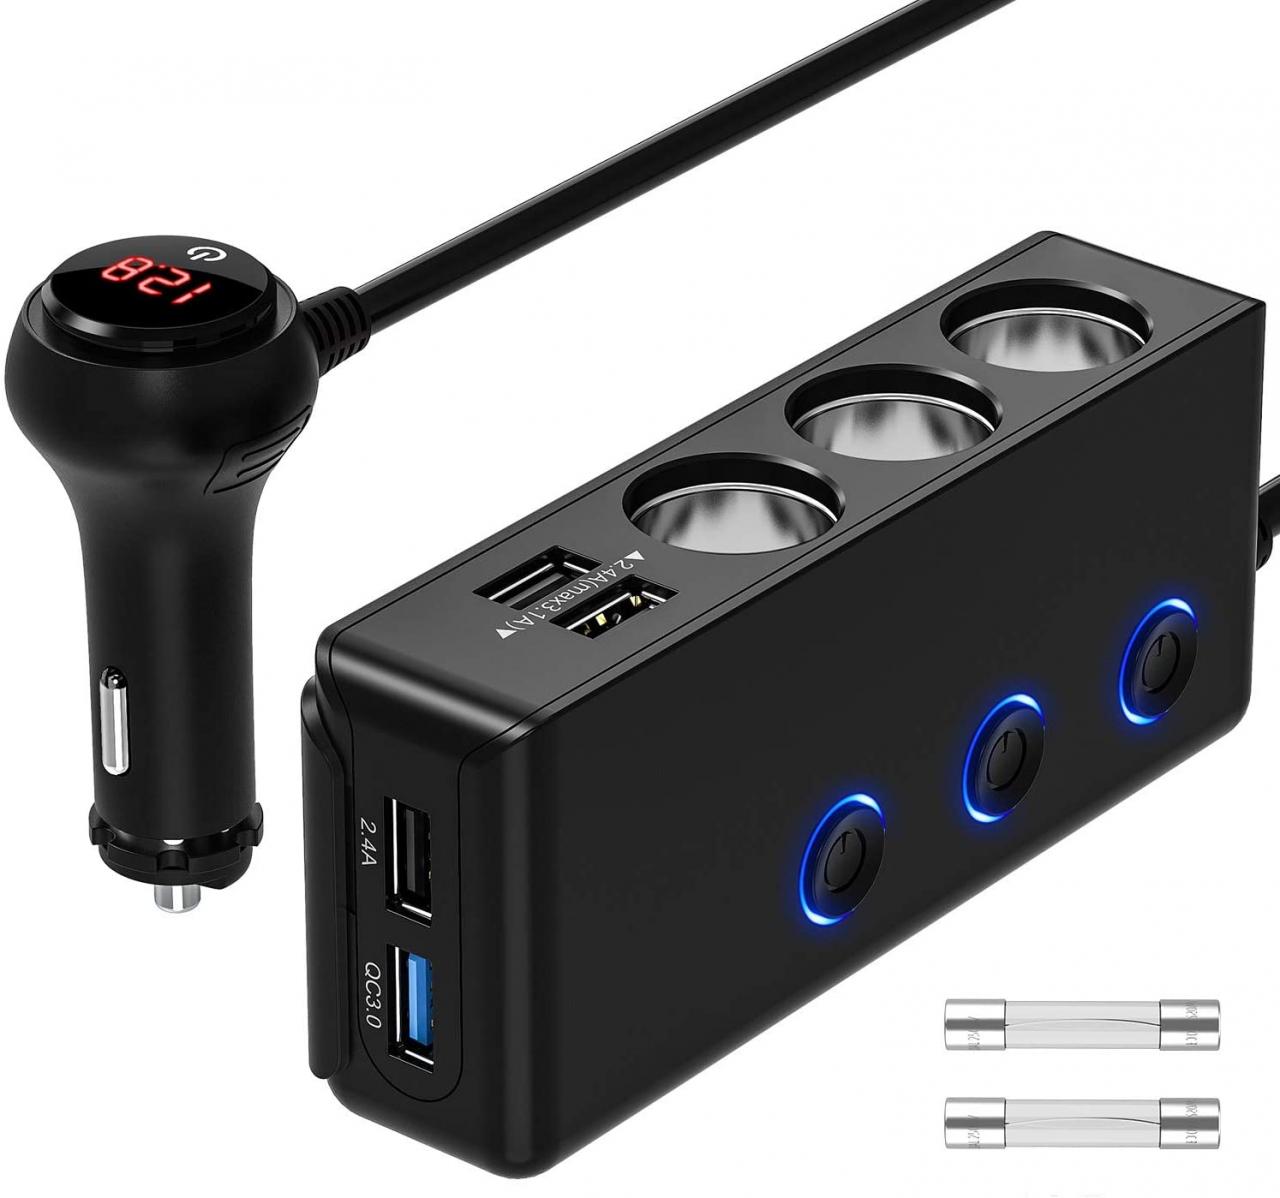 Best Cigarette Lighter Splitters (Review & Buying Guide) in 2020